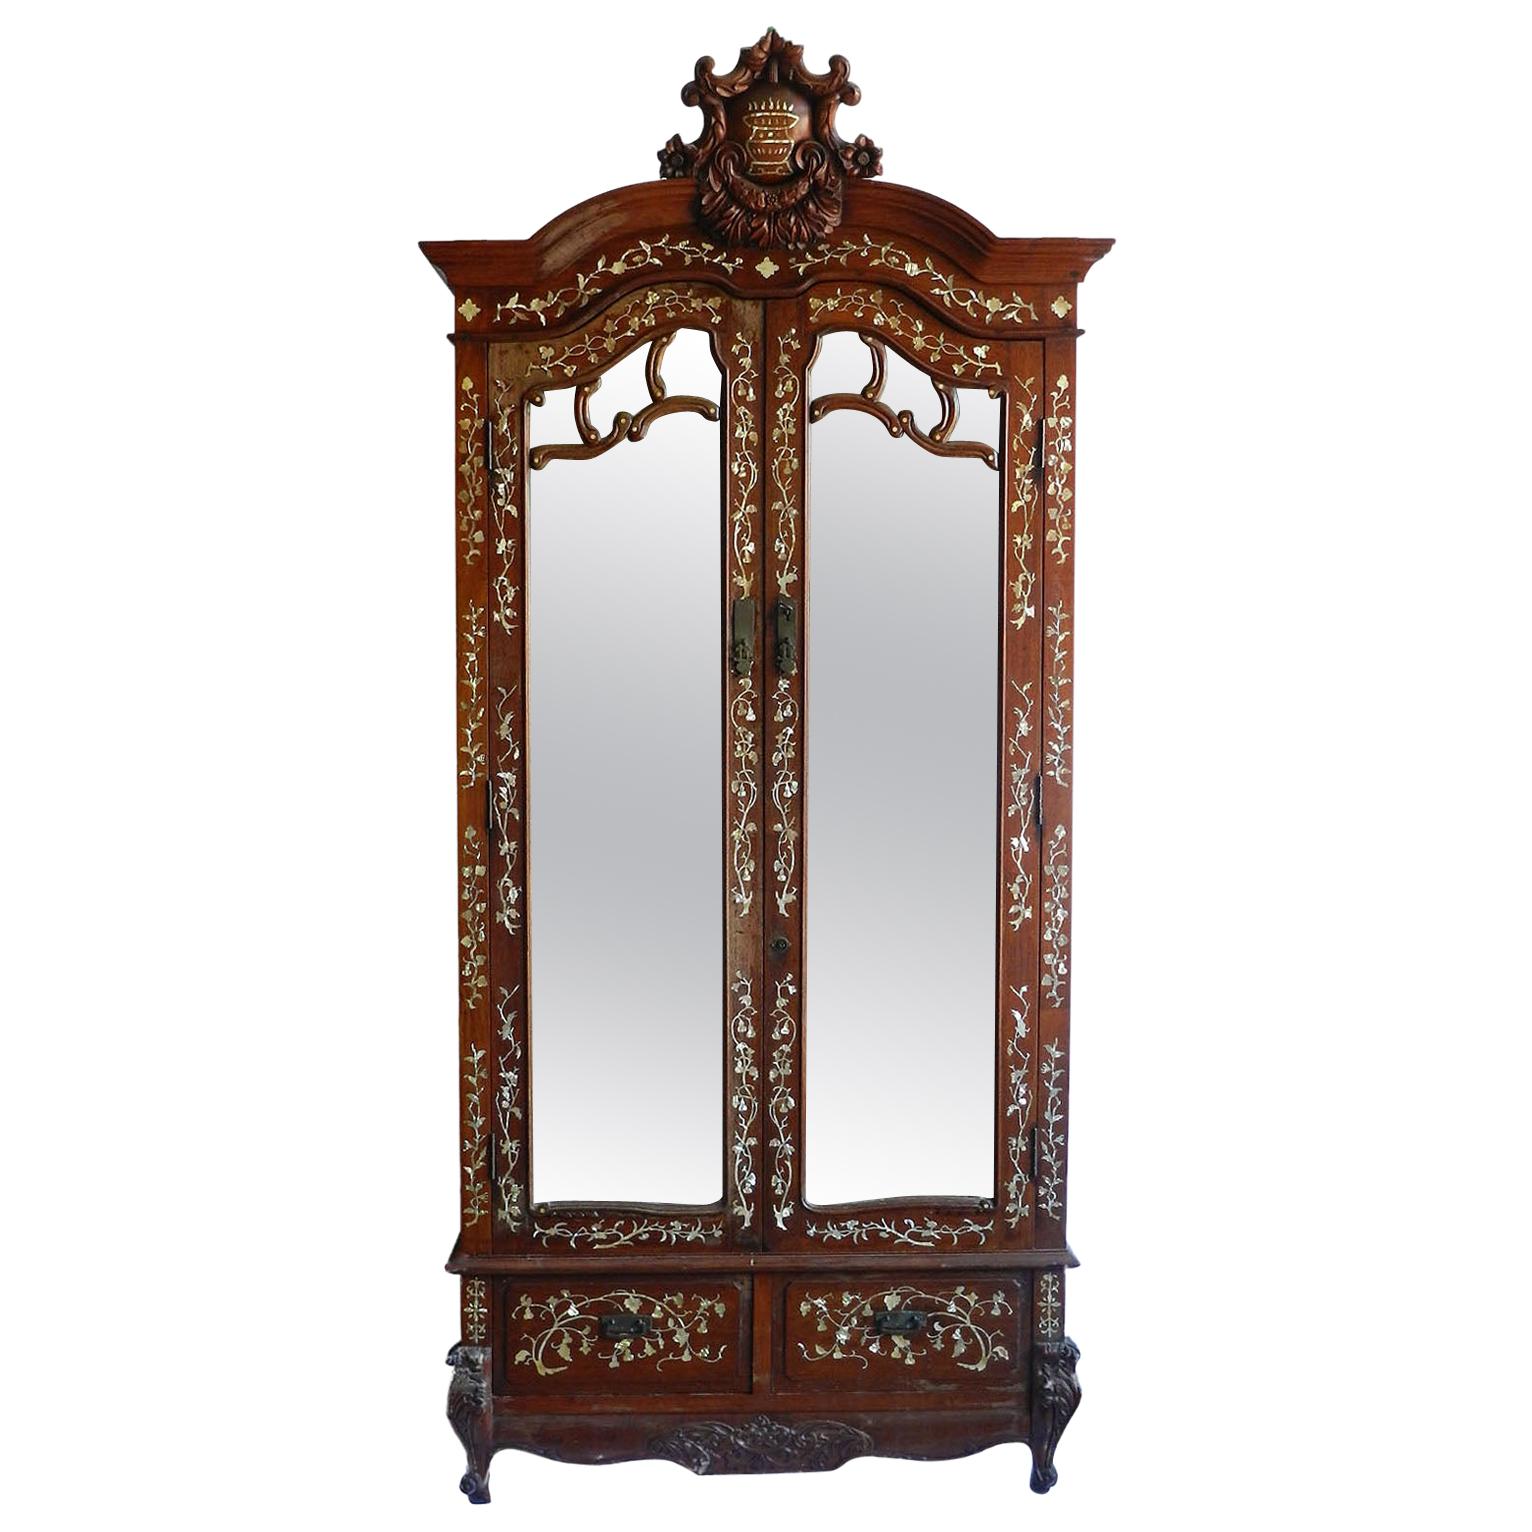 Chinoiserie Inlaid Armoire 19th Century Chinese Mirror Door Wardrobe For Sale